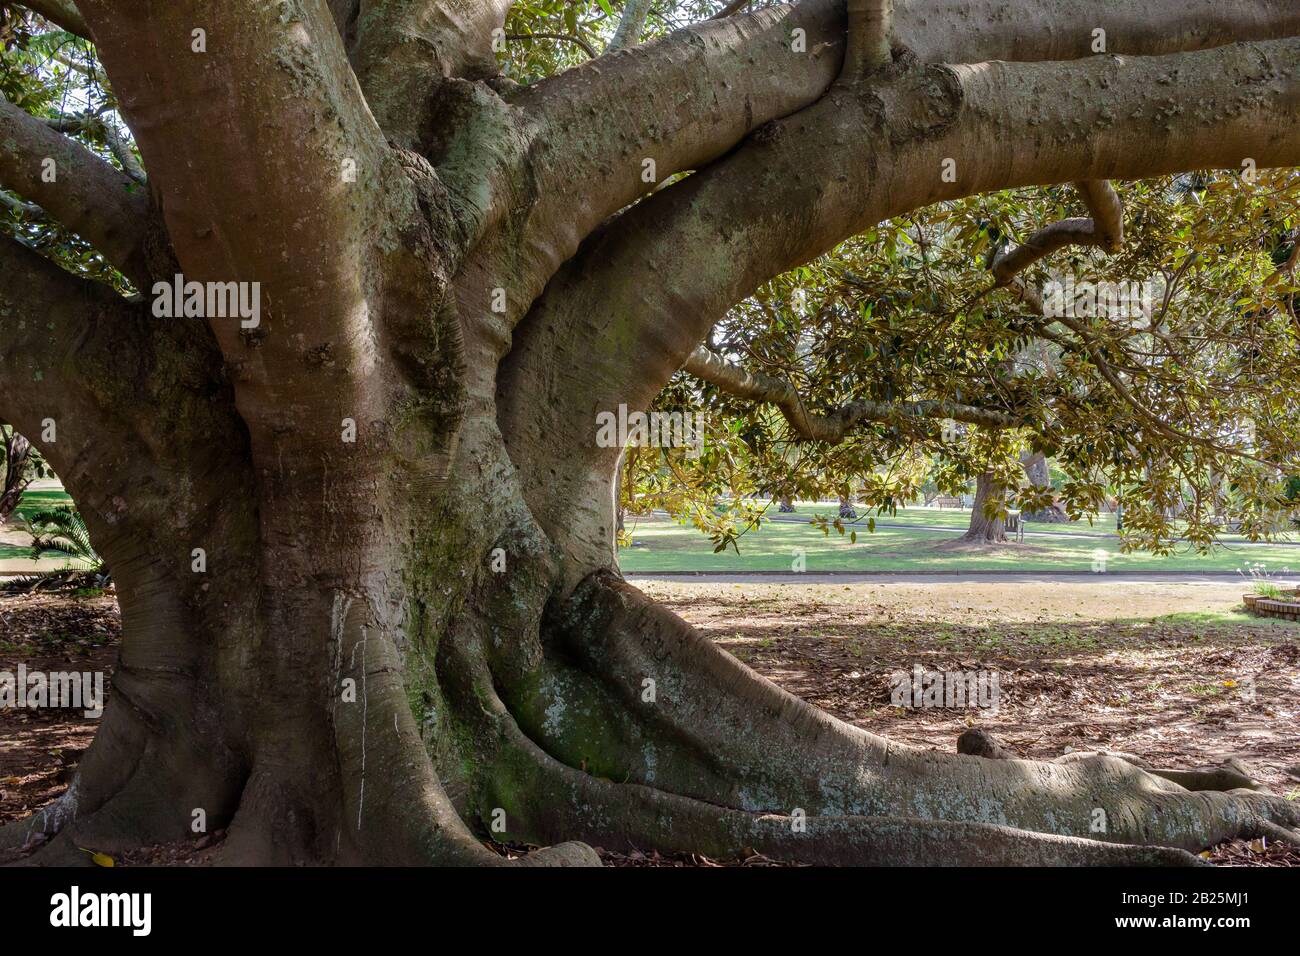 Very old wild fig tree trunk close up in park Stock Photo